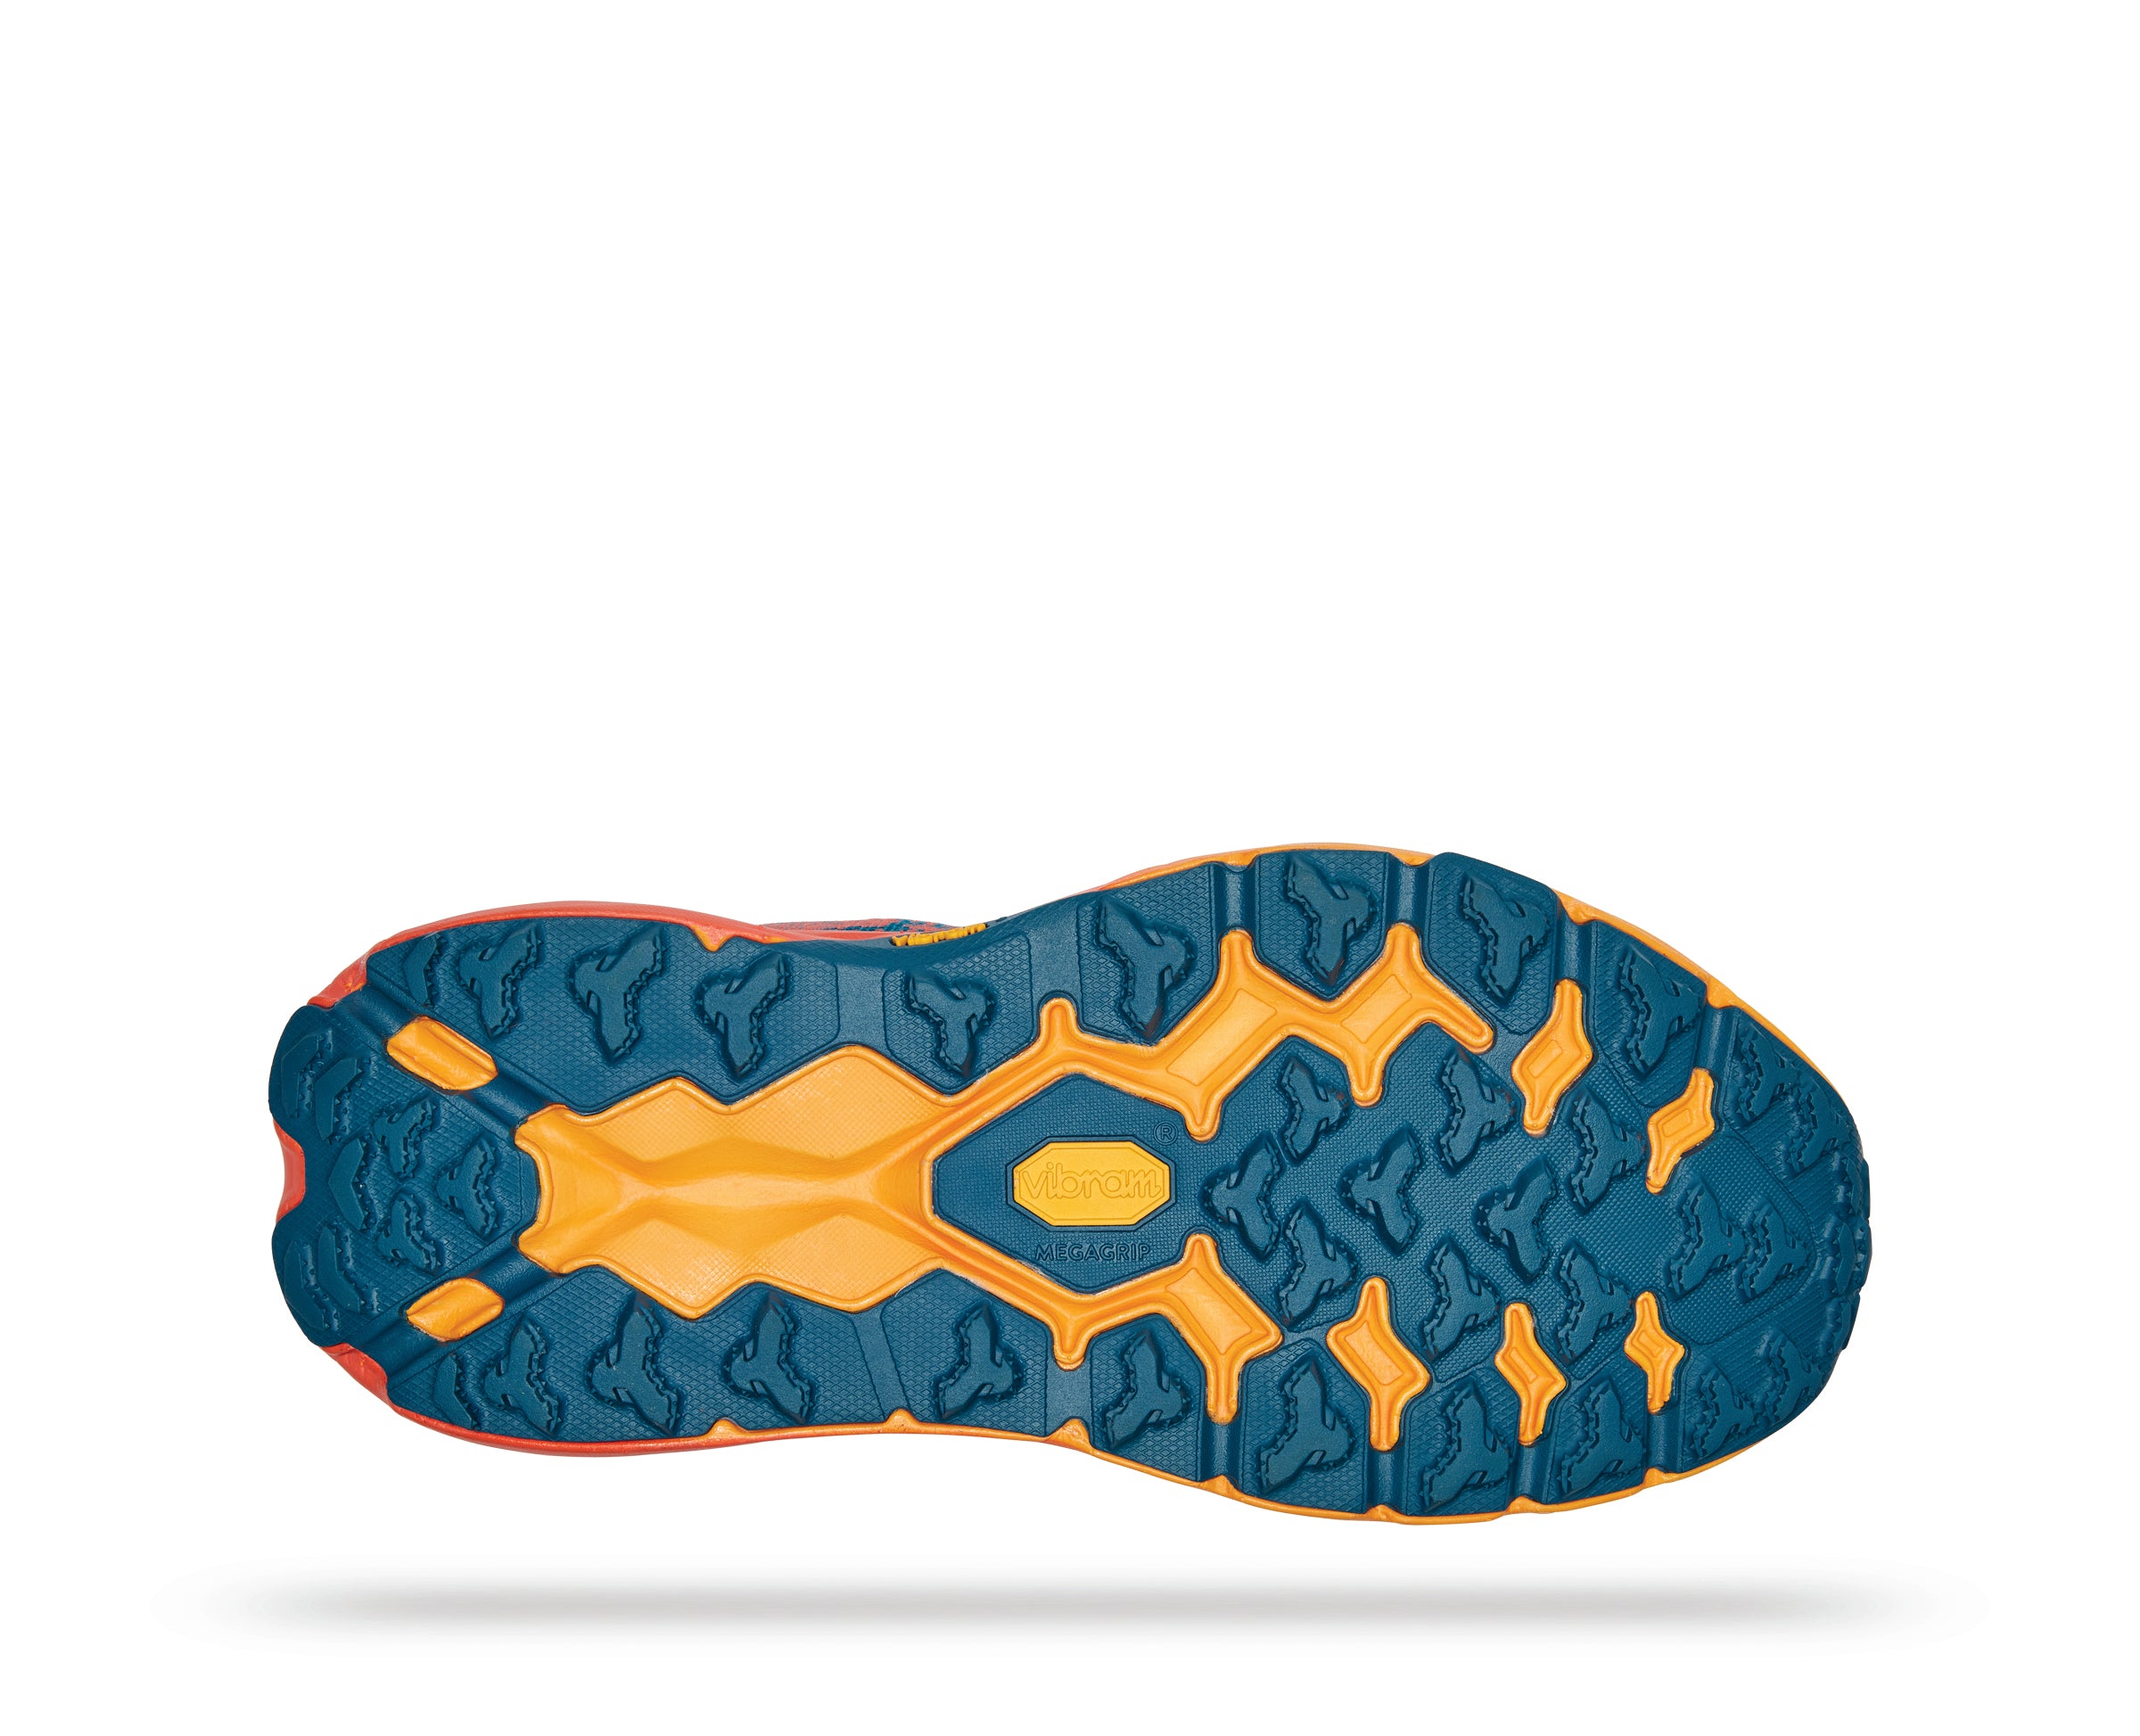 Bottom (outer sole) view of the Women's Speedgoat 5 by HOKA in the color Blue Coral / Camellia